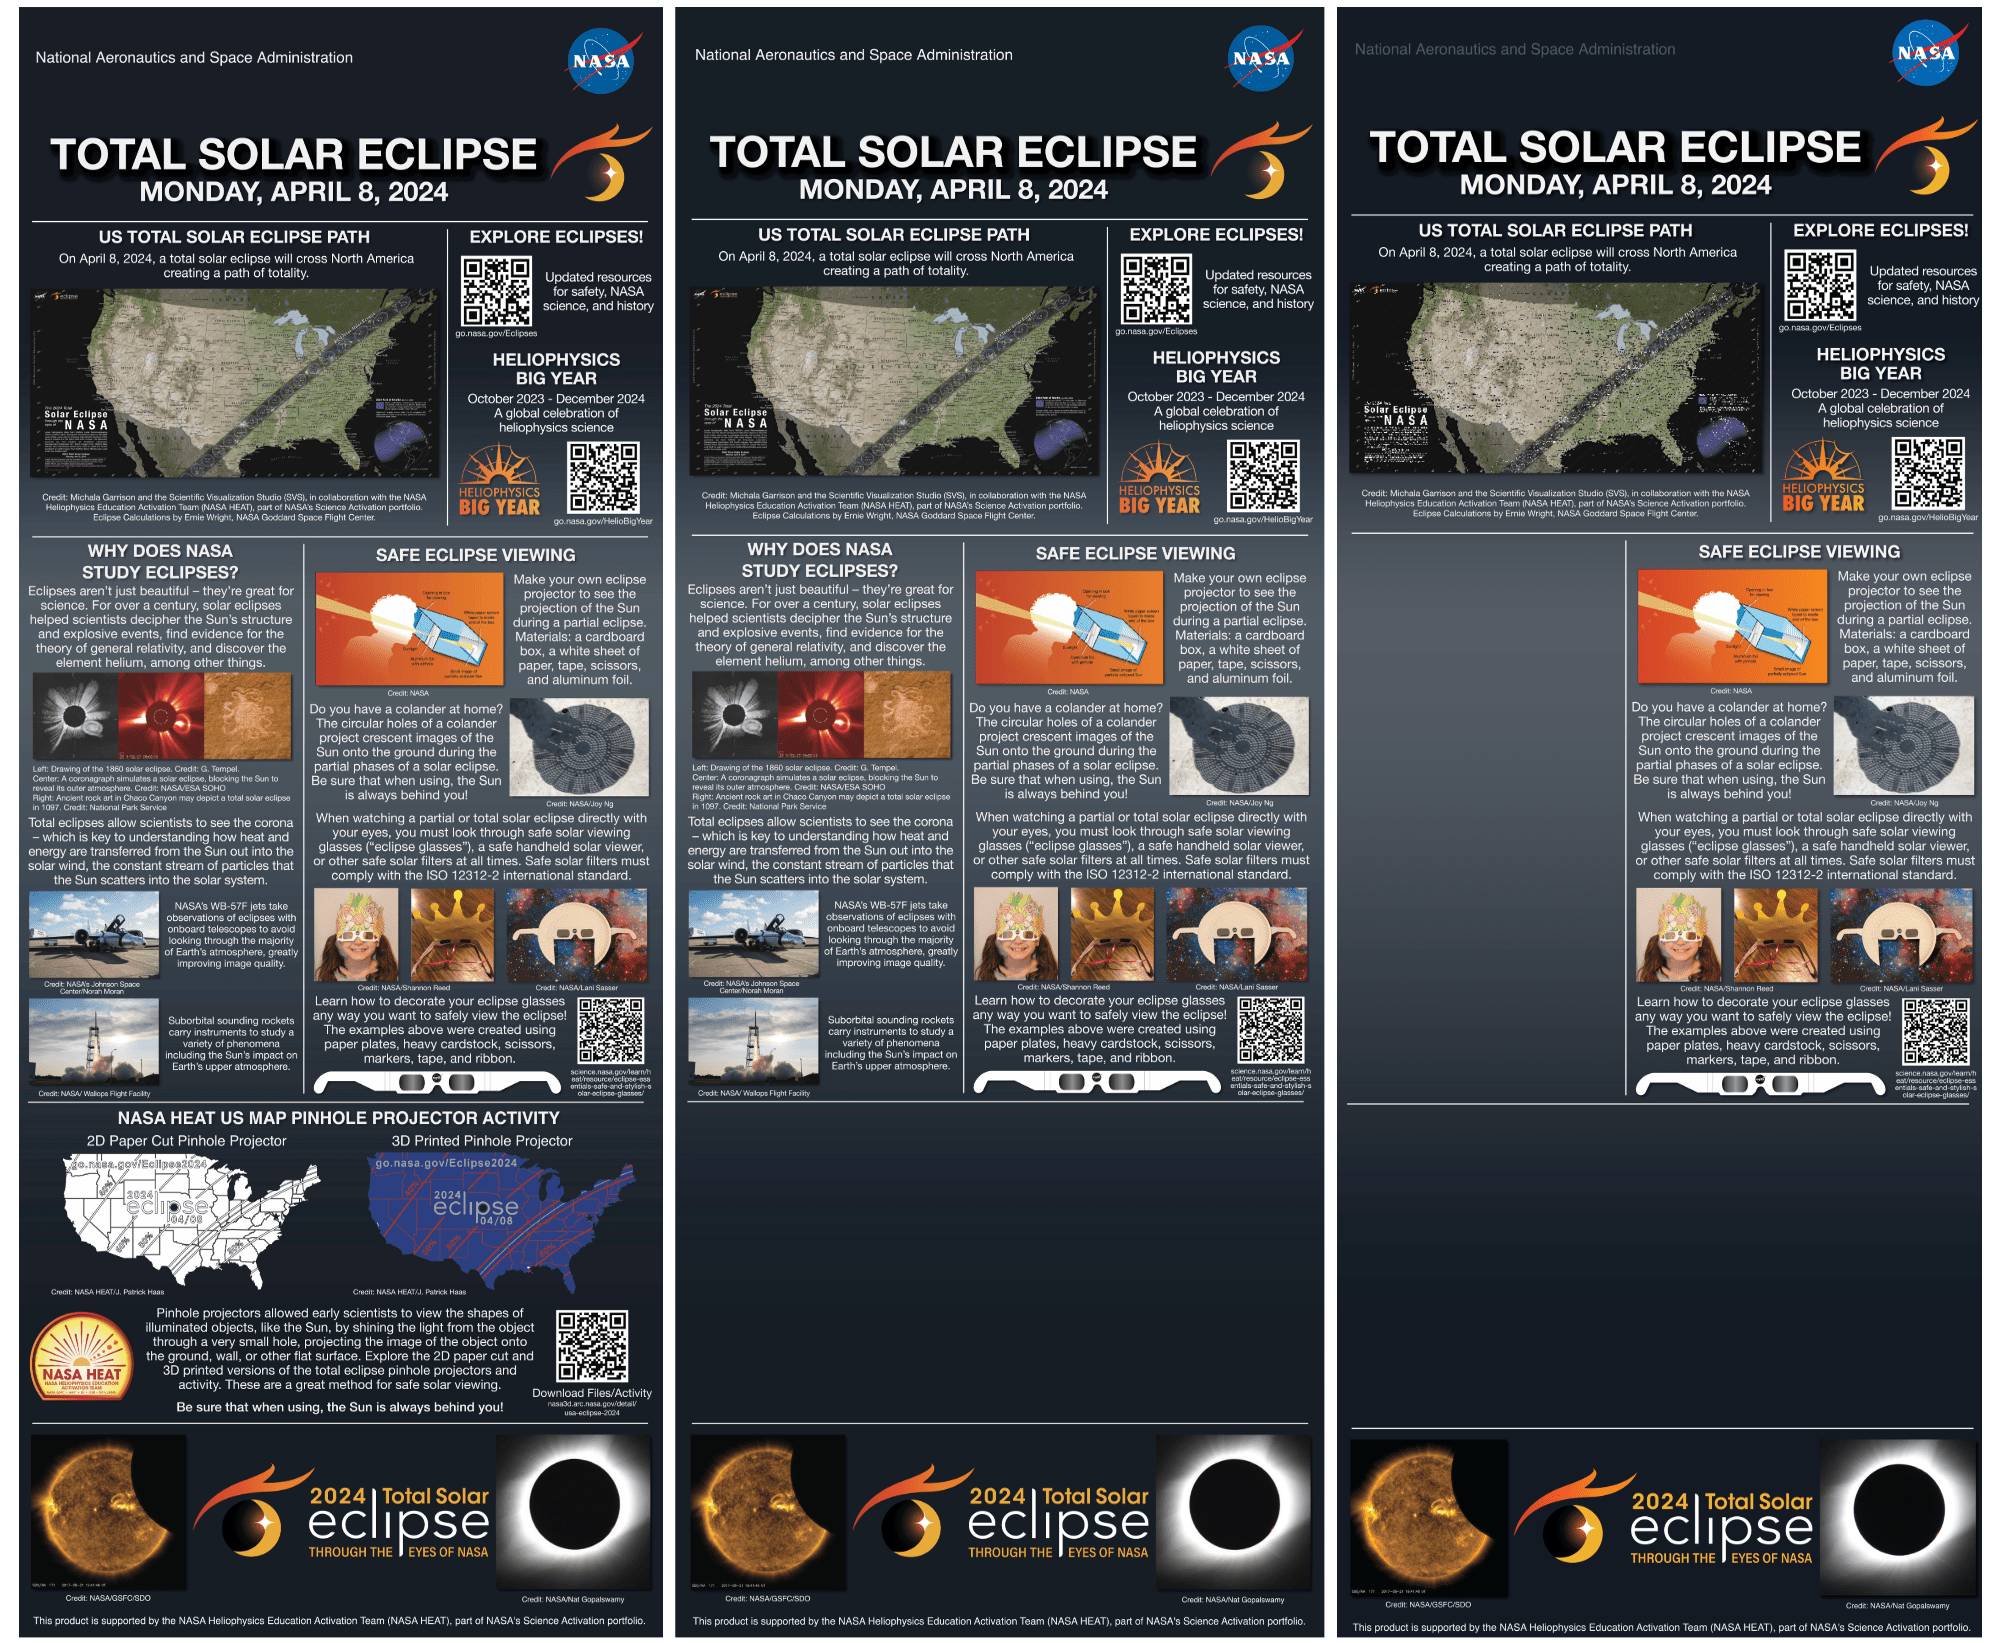 The three eclipse banners. On the far left is Version 1, which includes the most text. In the middle is Version 2, which provides a little less detail. And on the right is Version 3, which has a little information and a lot of blank areas.